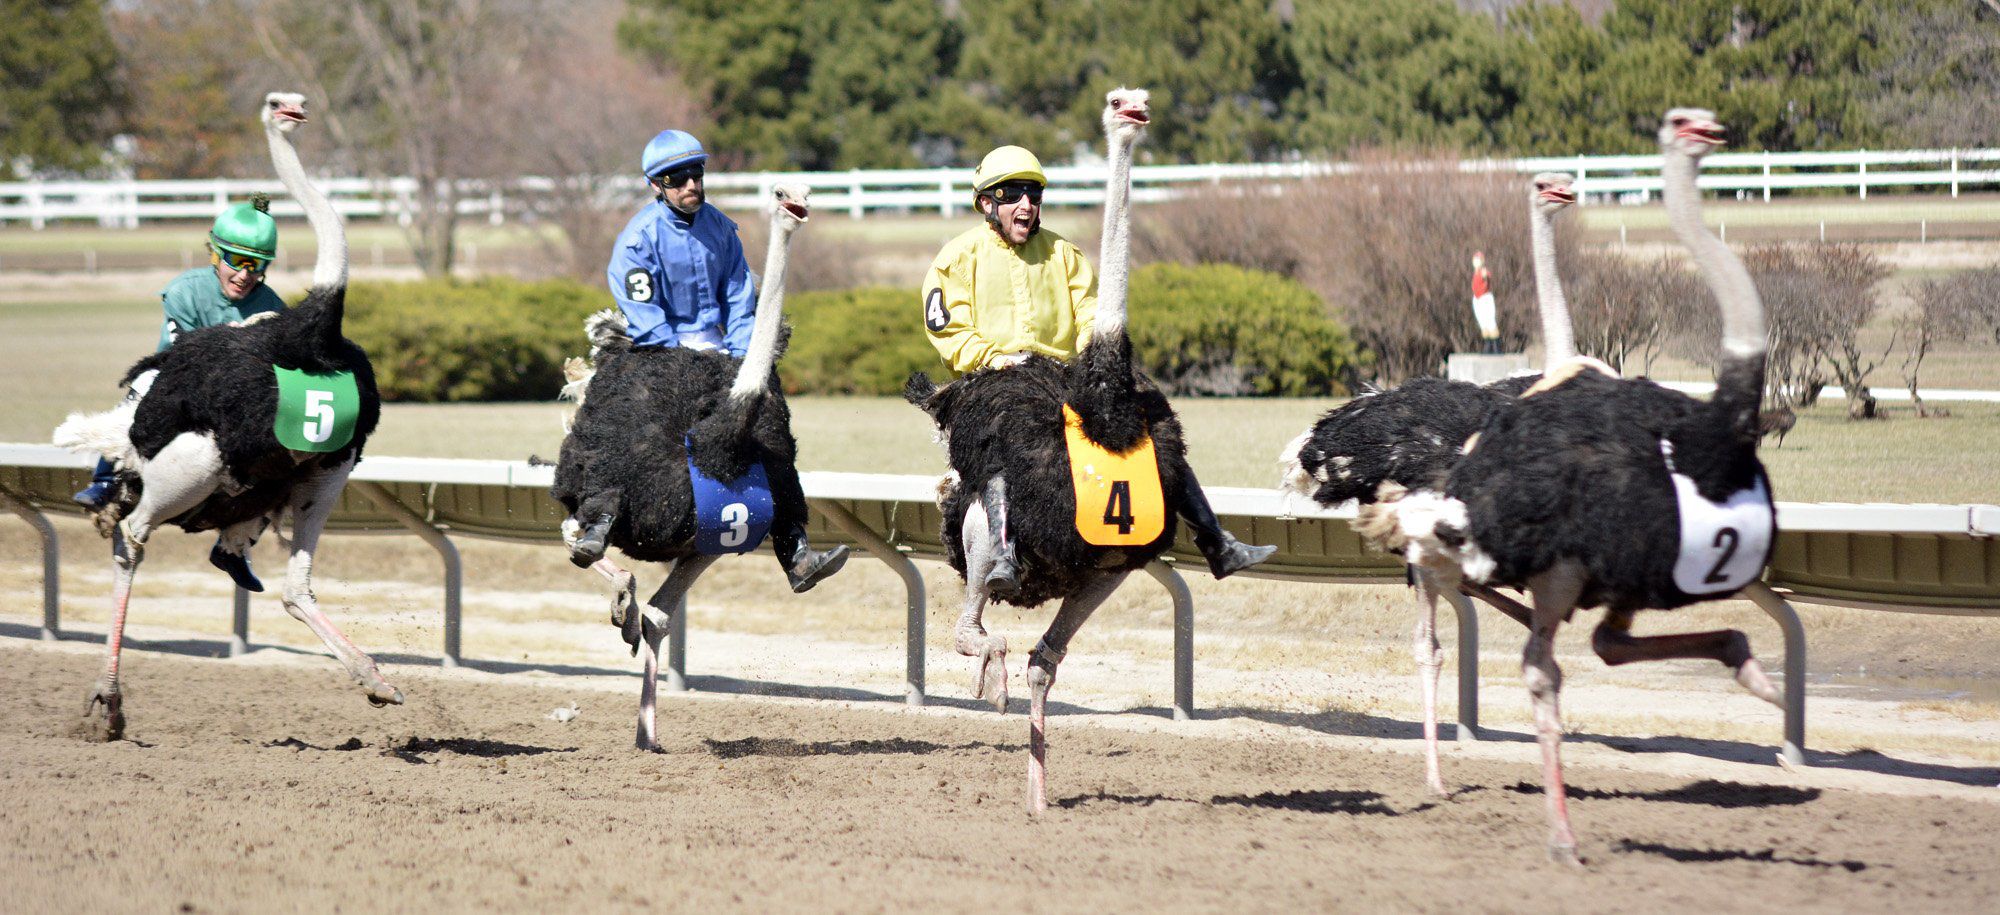 Some 'controversy' surrounds finish of ostrich race at Fonner